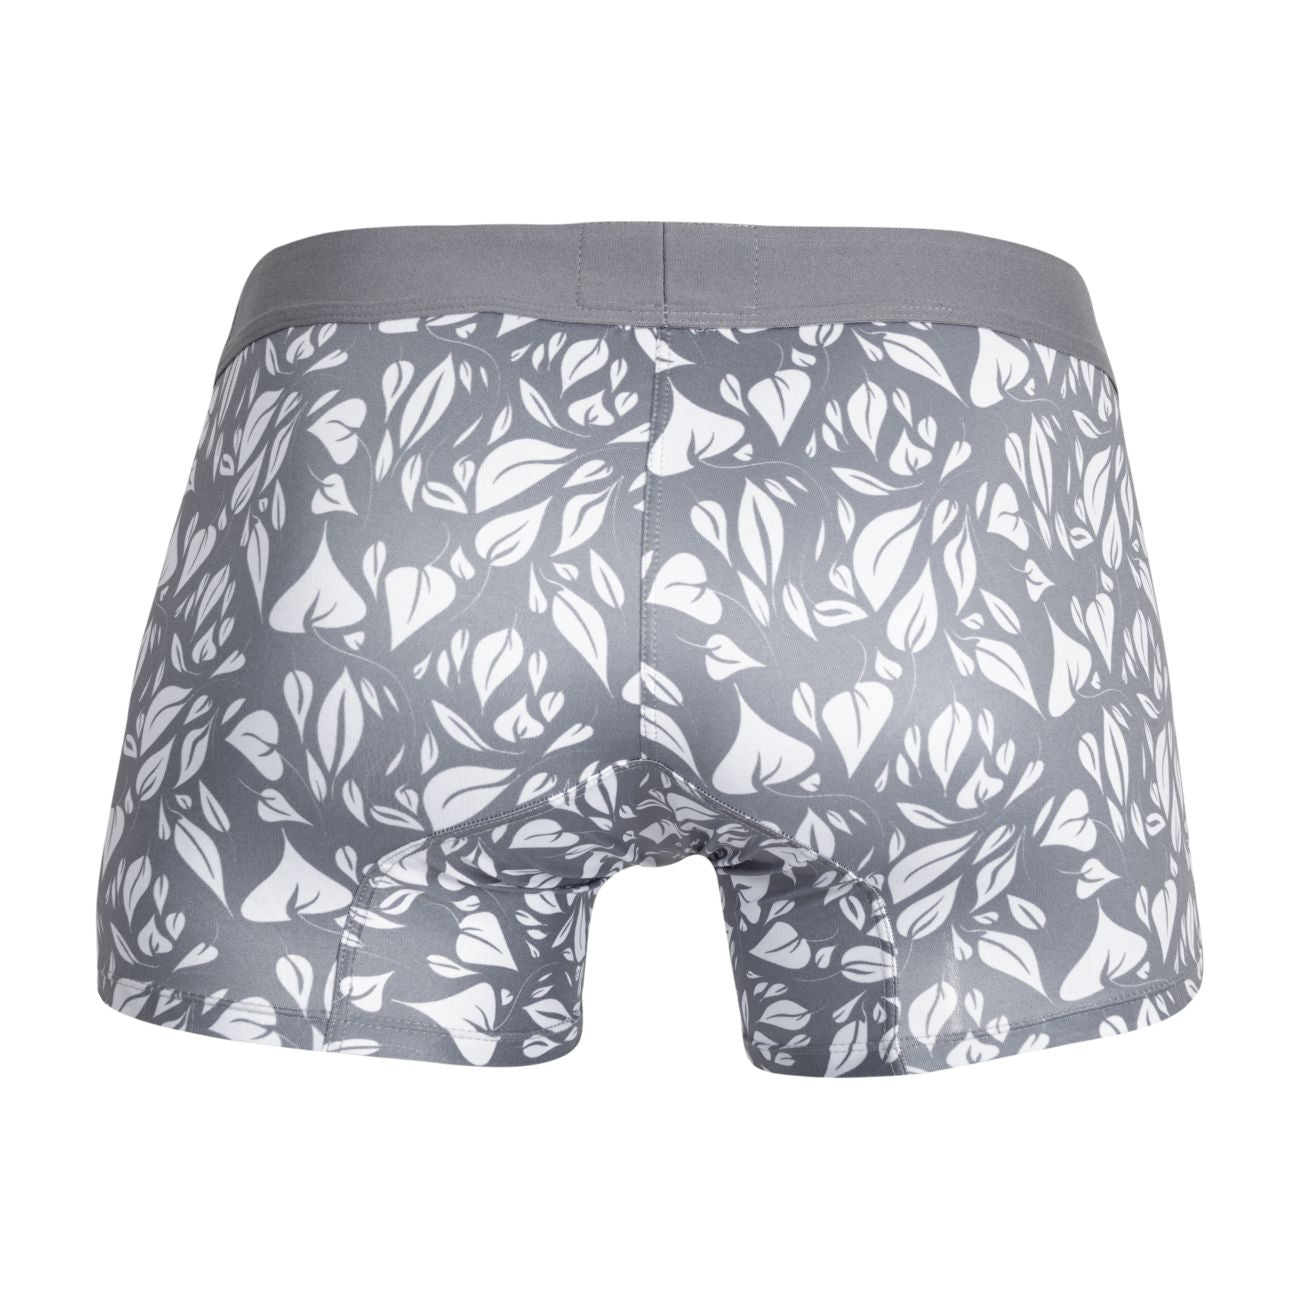 Clever 1456 Grace Trunks Gray